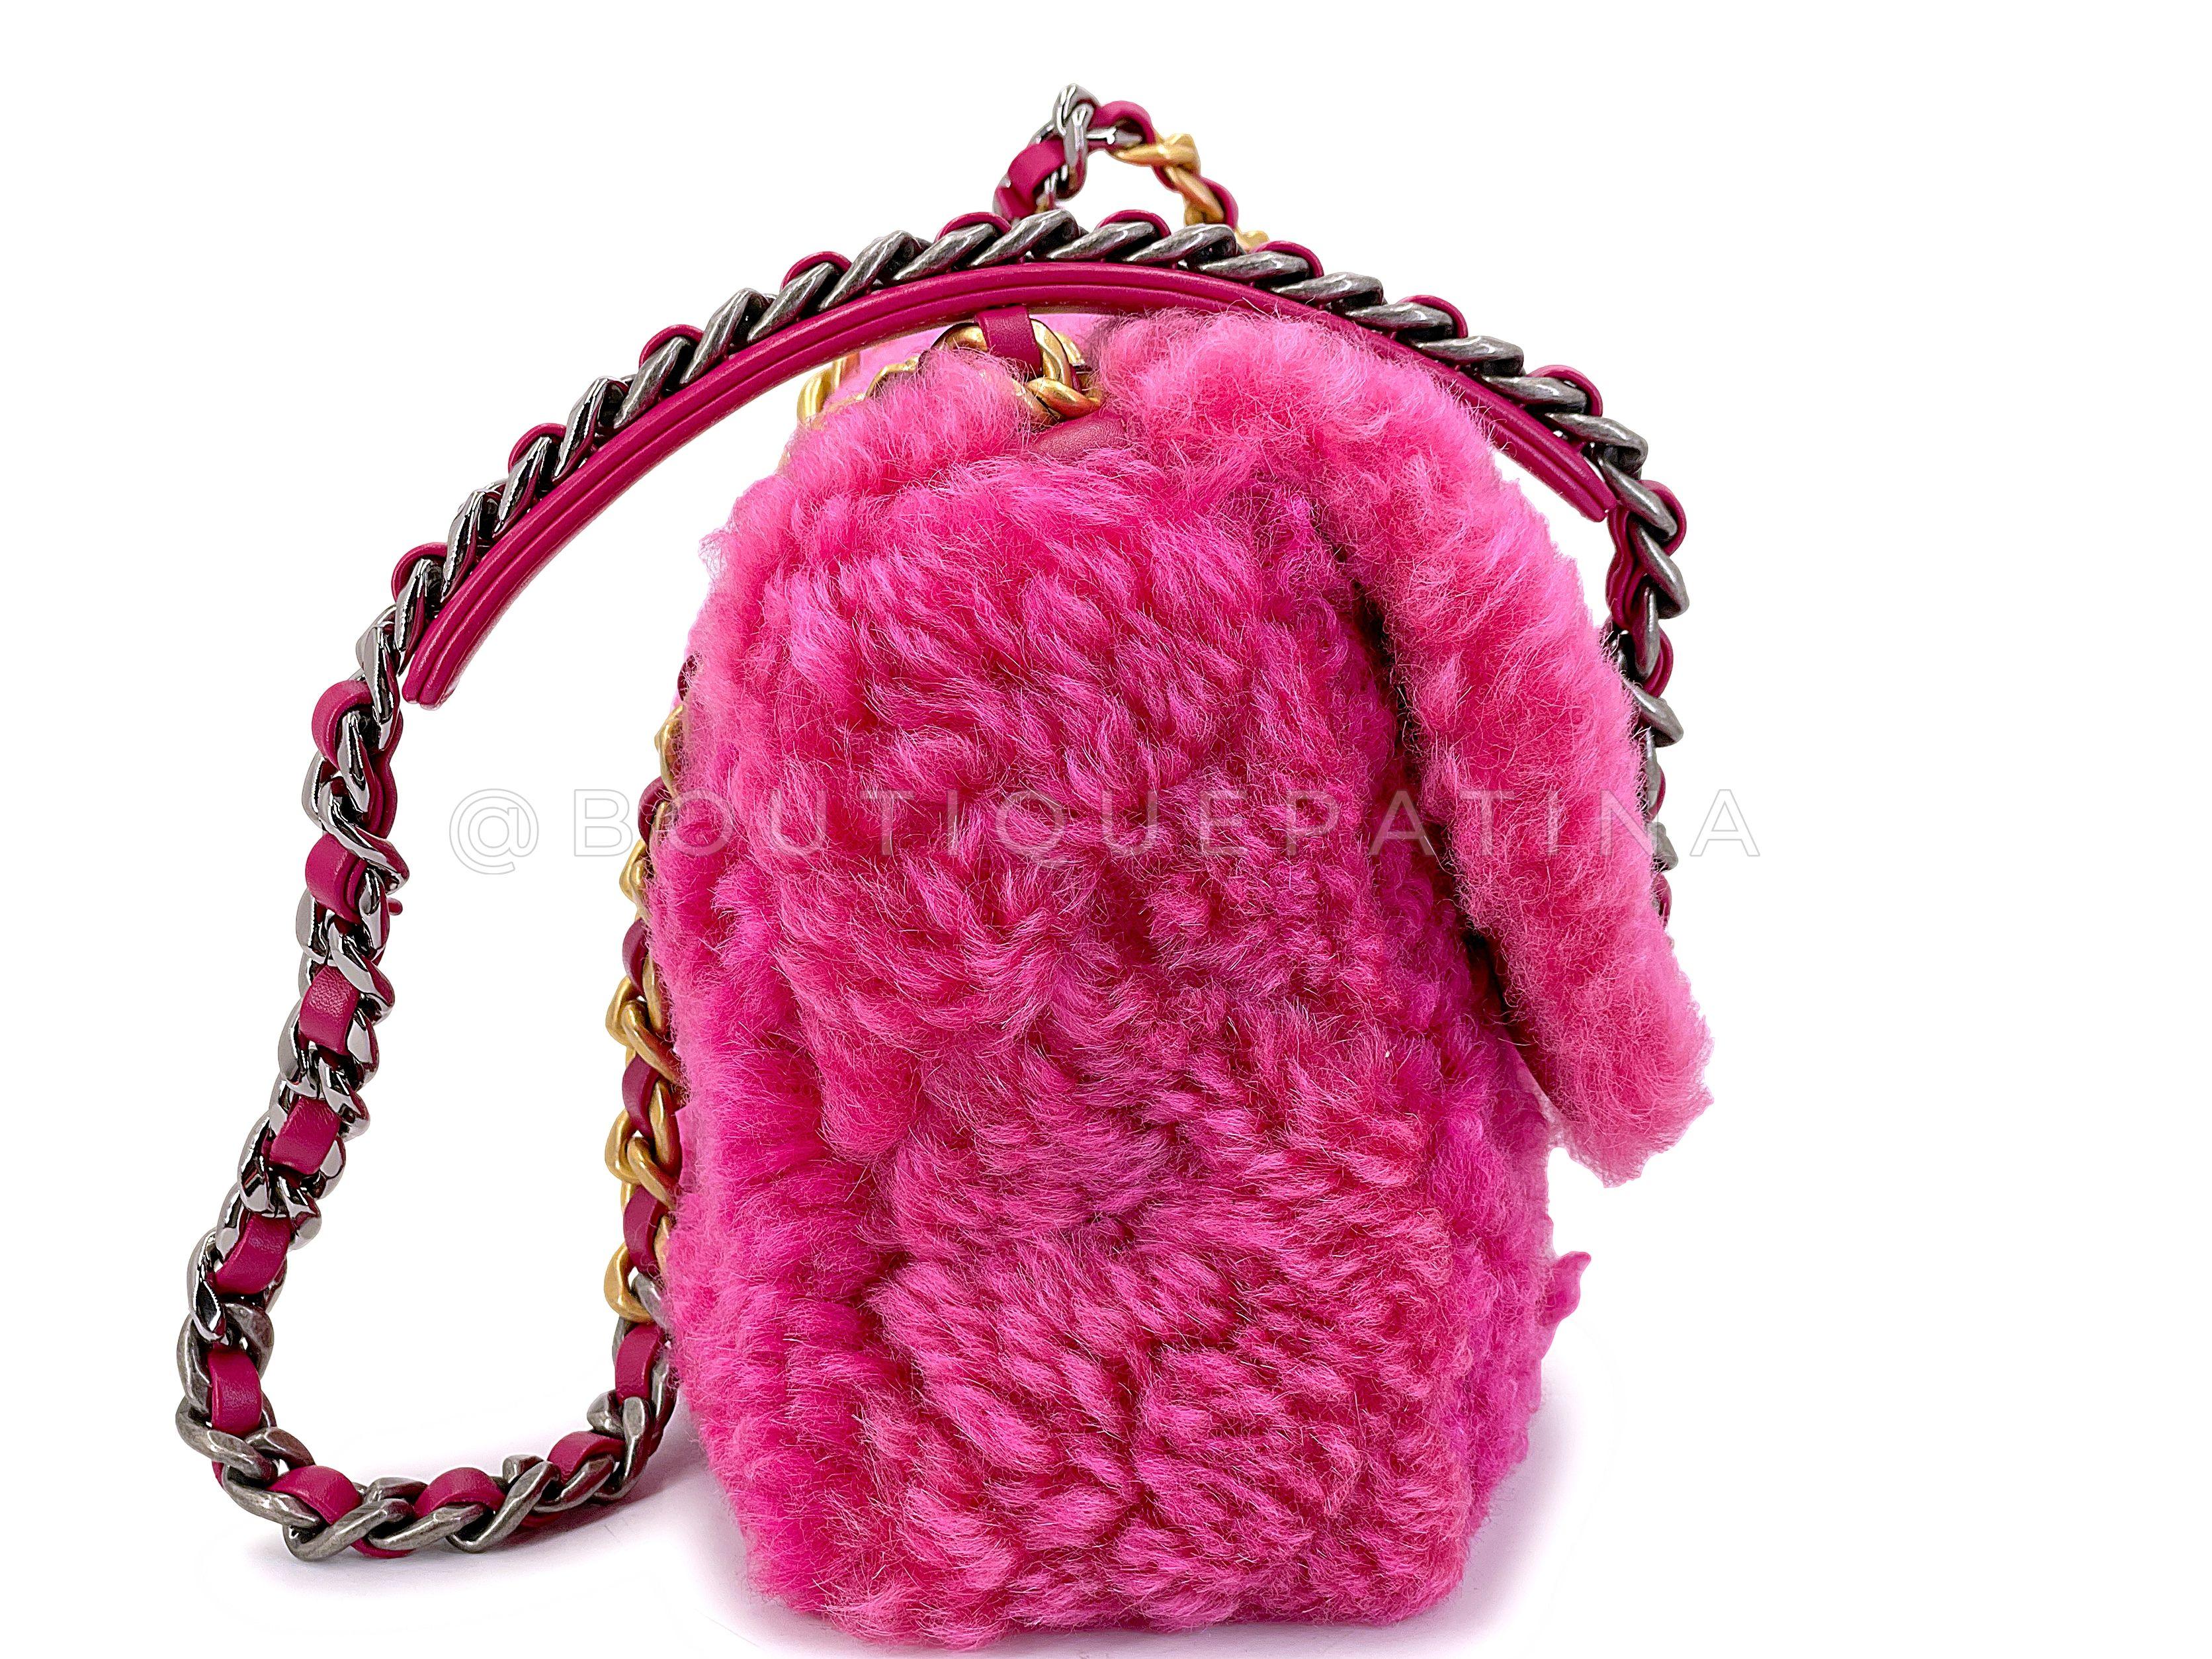 Chanel 19 Pink Shearling Fur Small Medium Flap Bag 67786 In Excellent Condition For Sale In Costa Mesa, CA